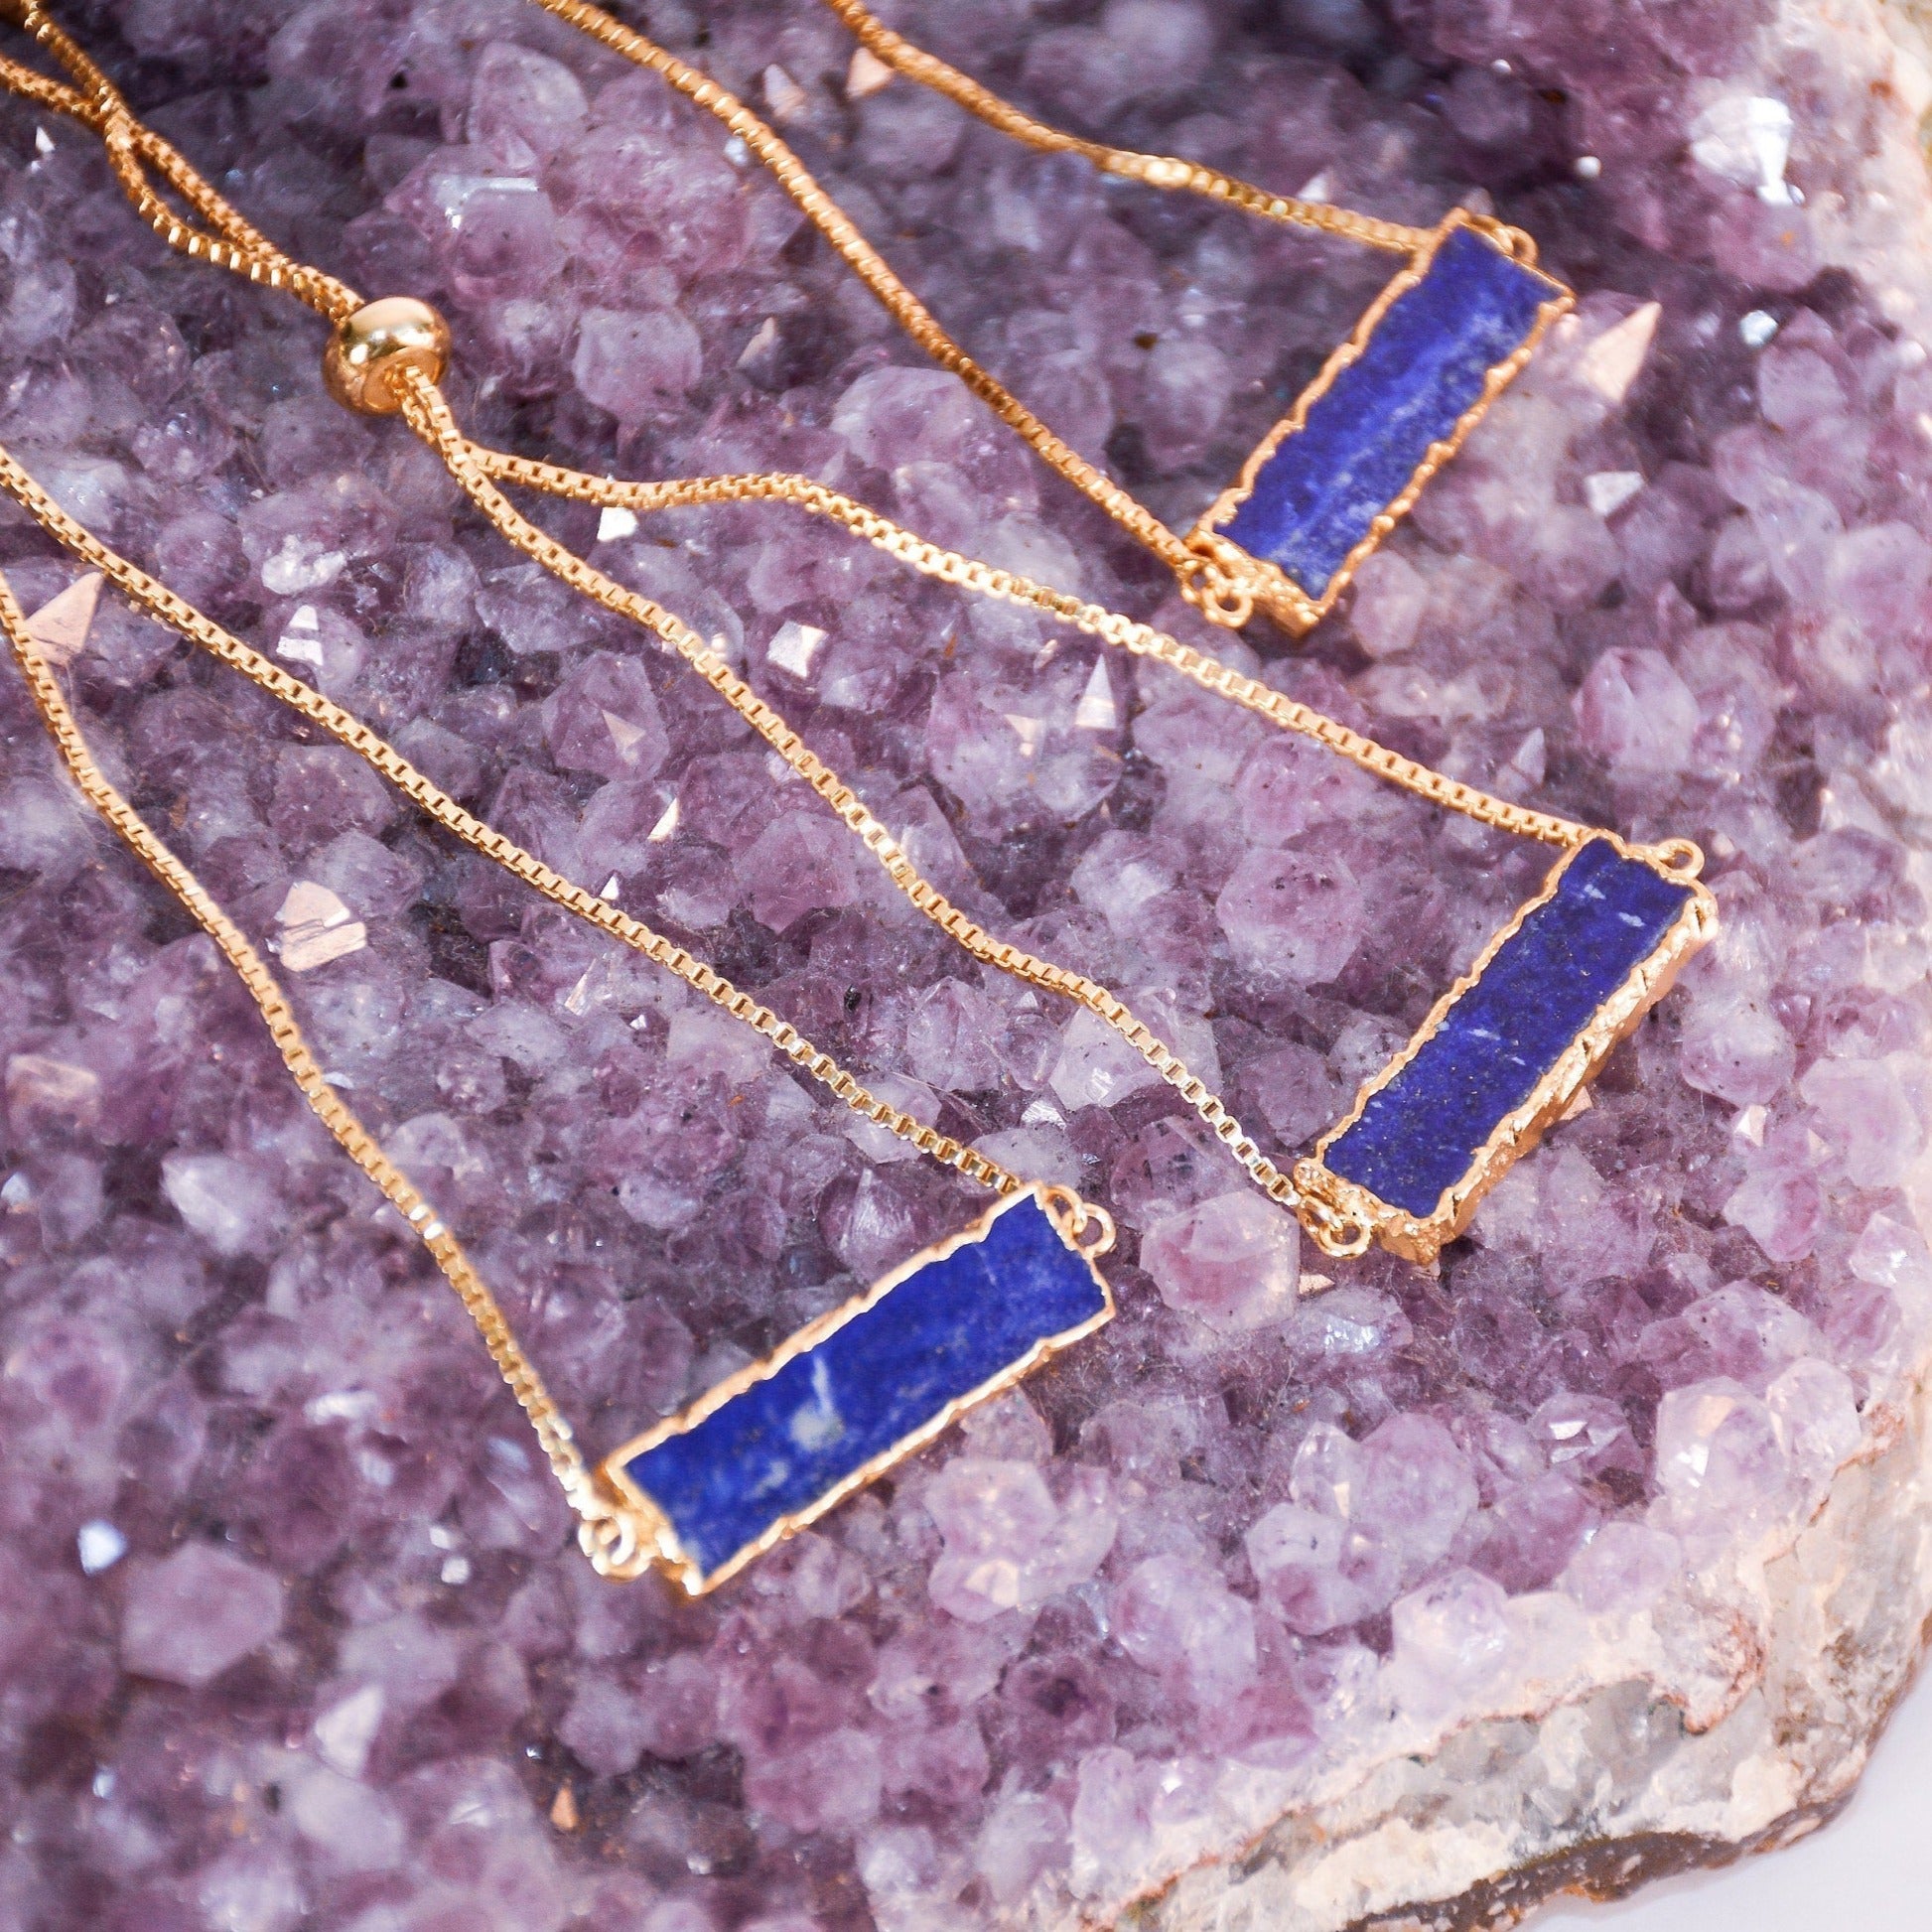 ･ﾟ✧*･ﾟ* SOLD OUT *･ﾟ*✧･ﾟ     Lapis Lazuli Bolo Bracelet in Gold